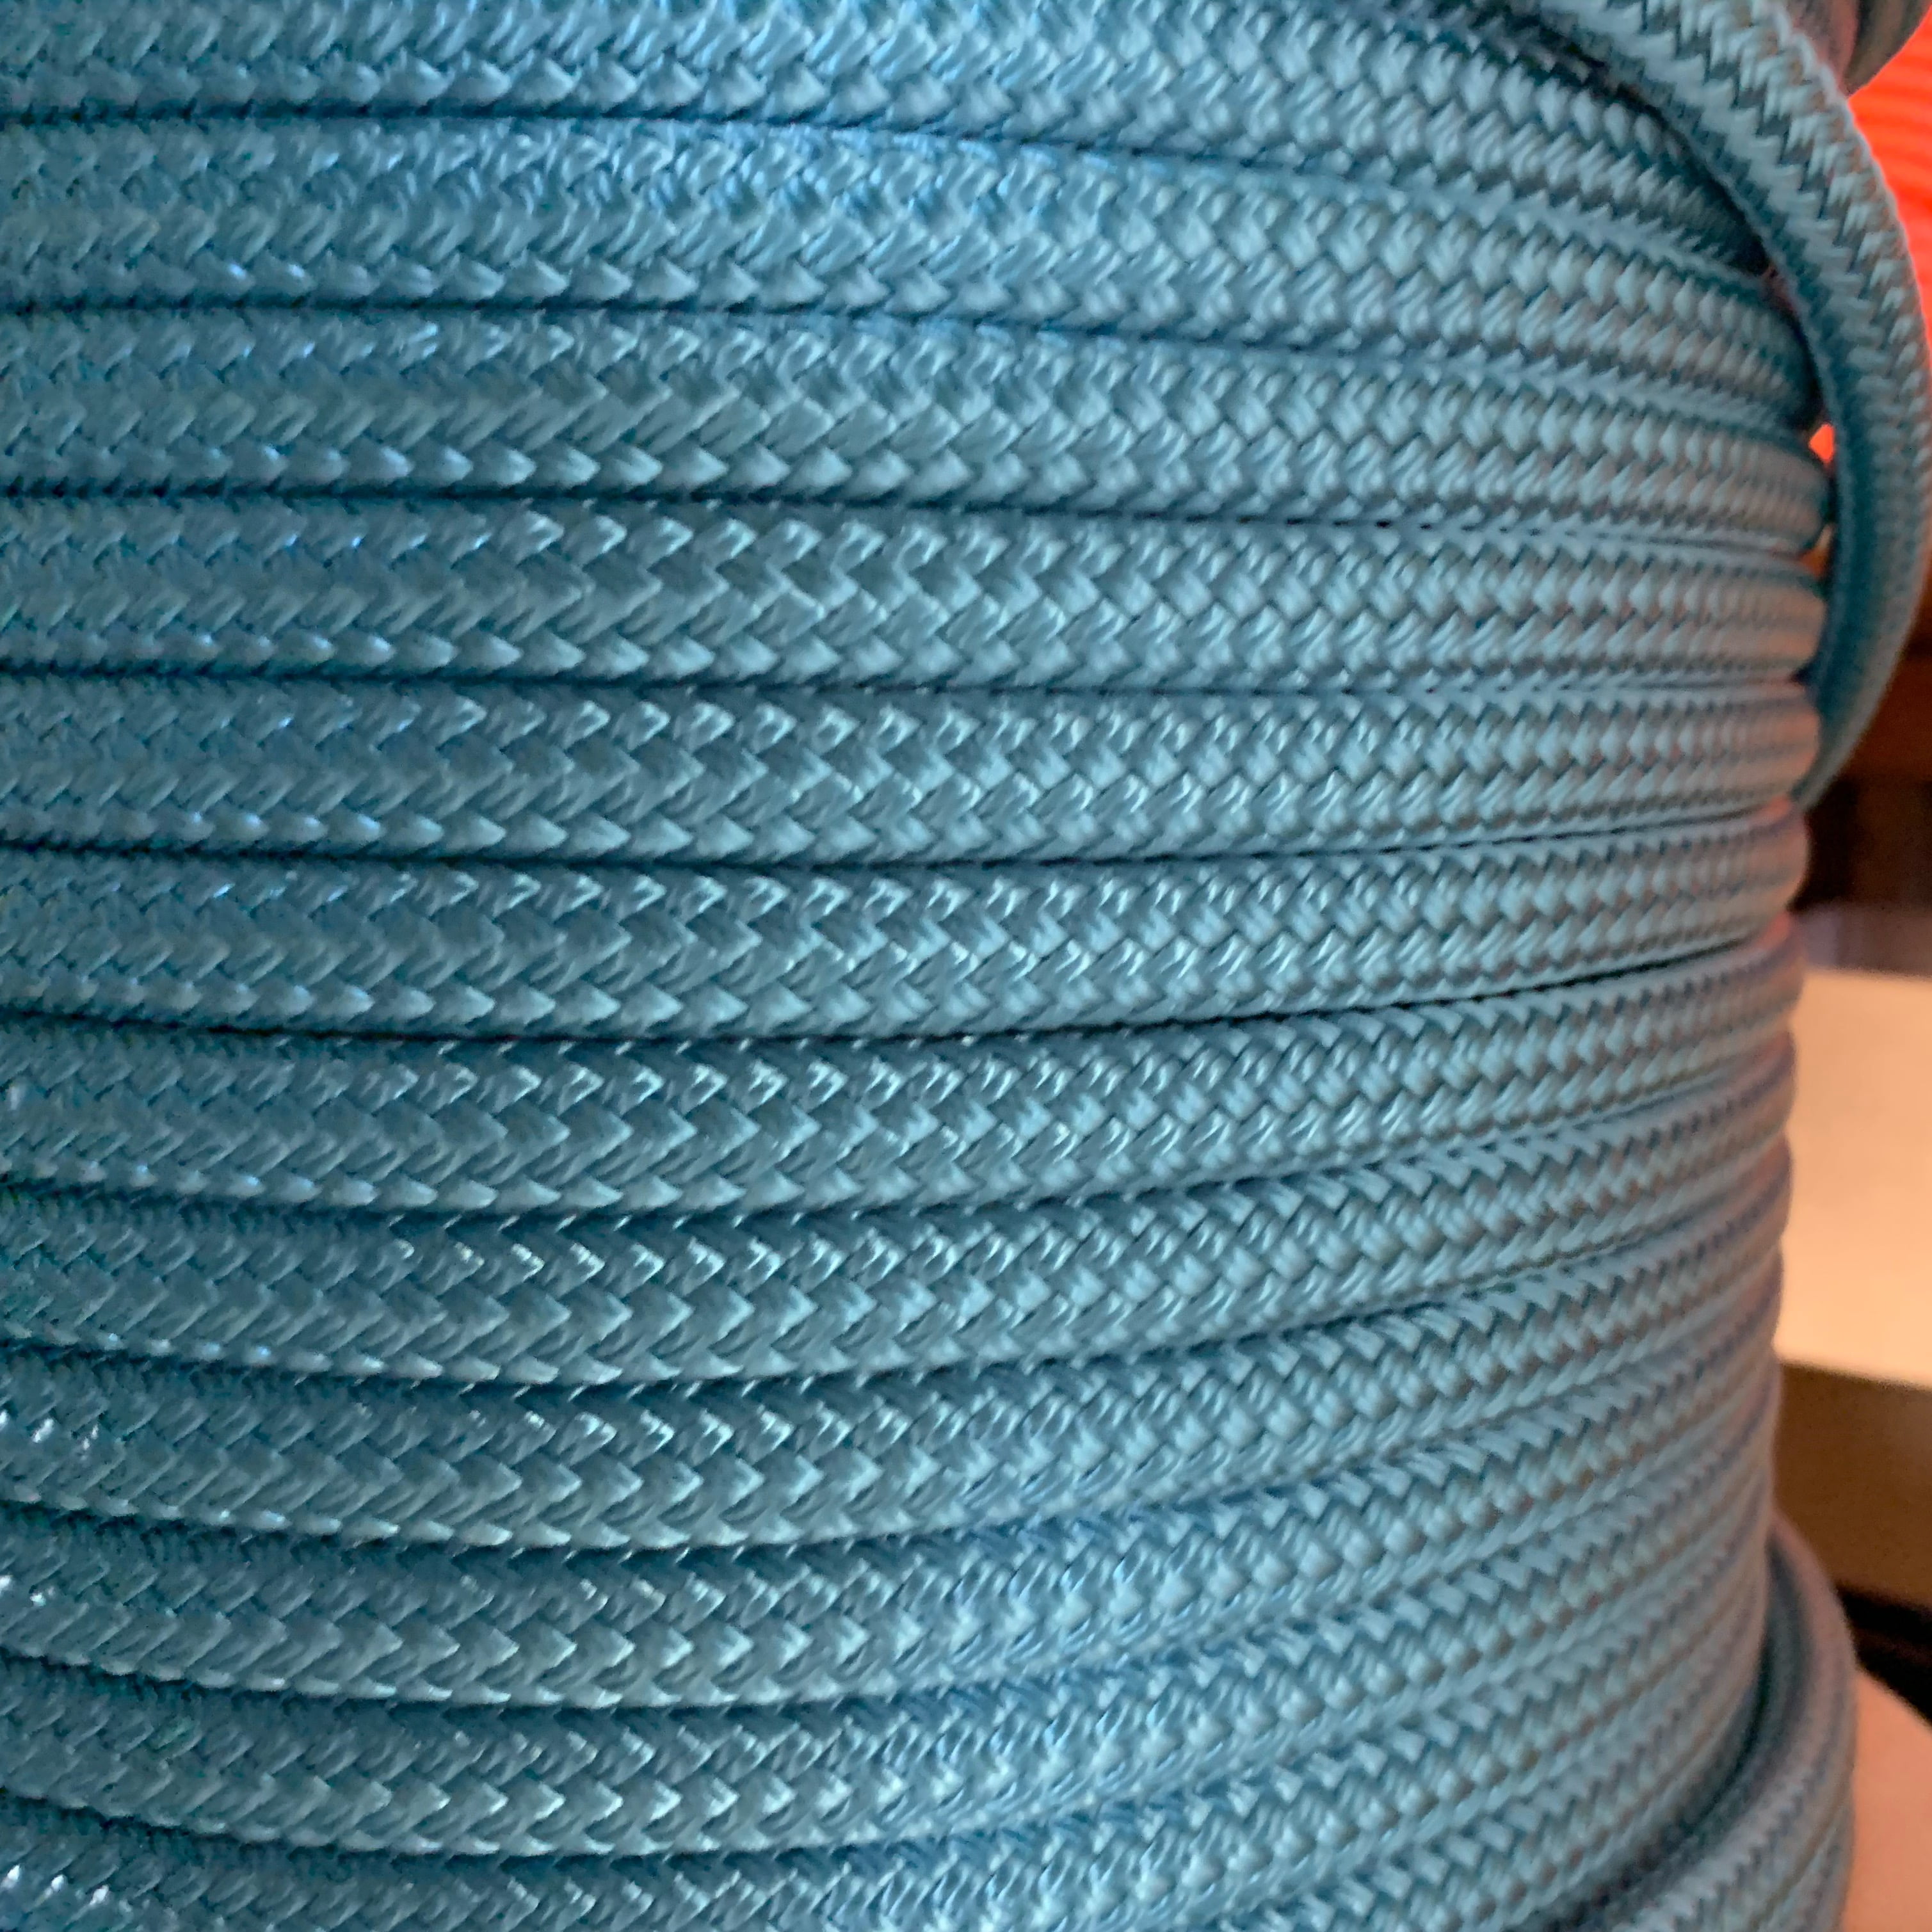 3/16 x 200 ft Double Braid Yacht Braid Polyester.Sailboat Line/ Marine Rope 